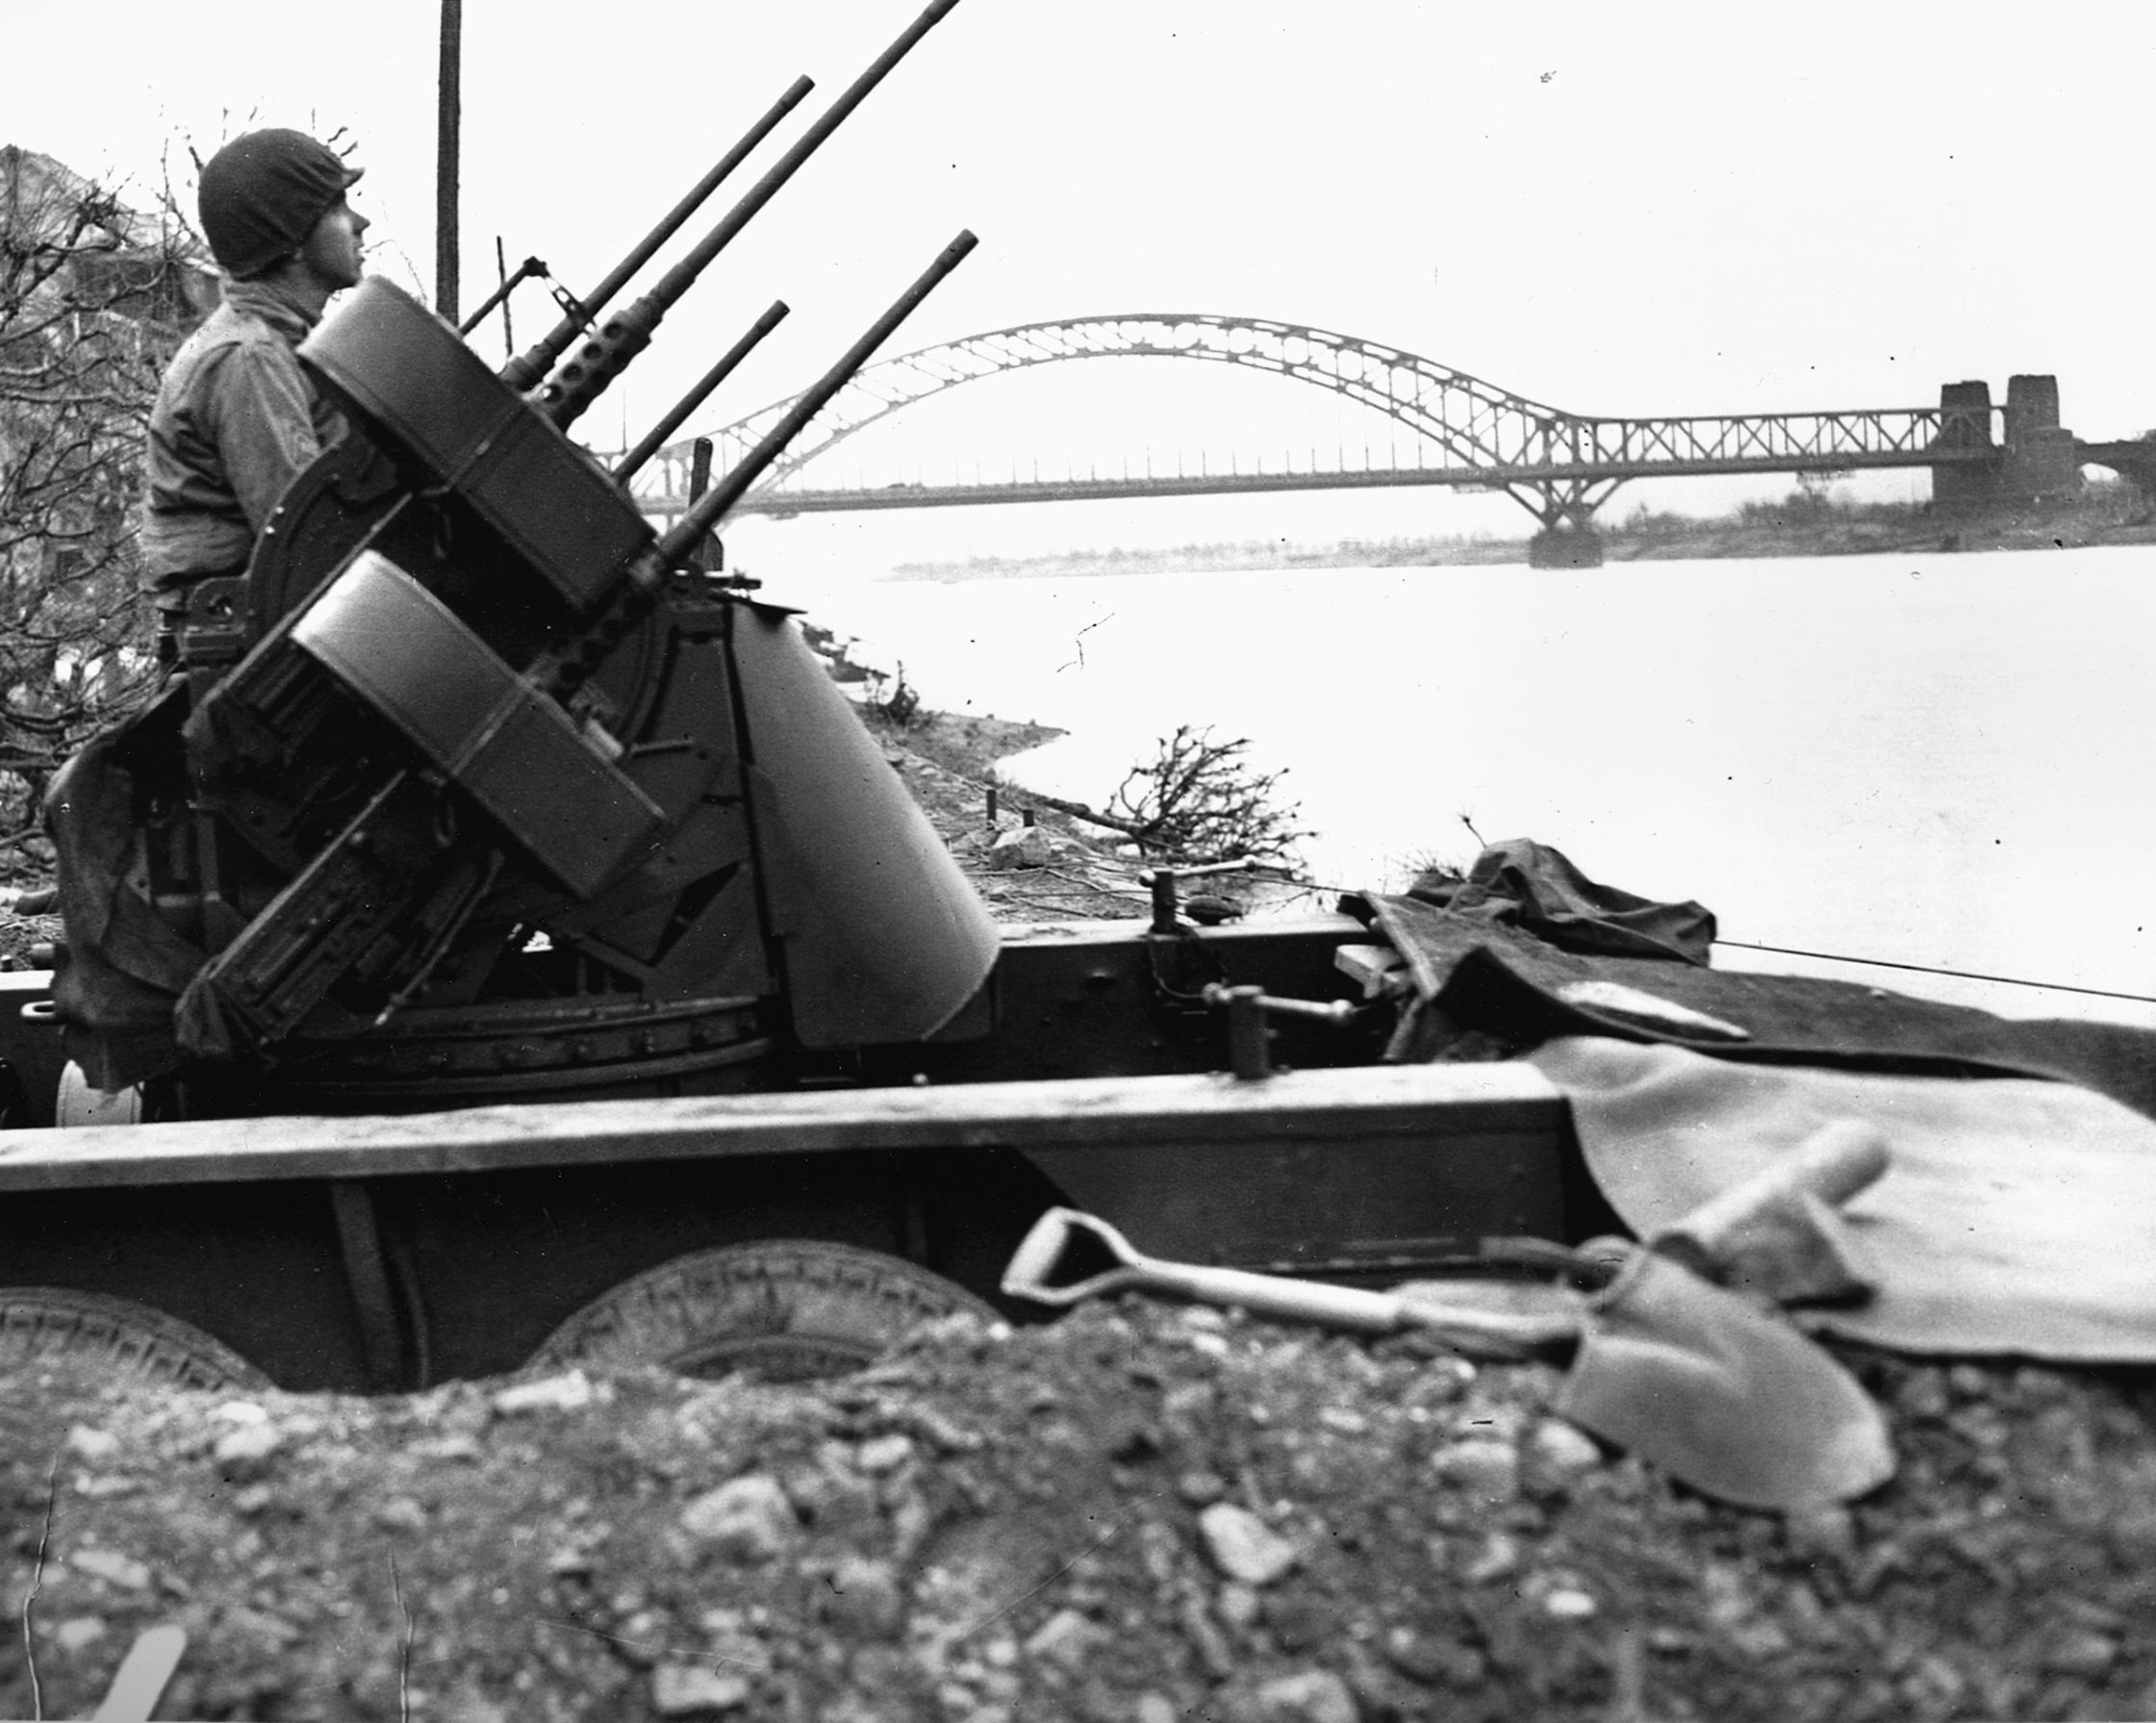 Pfc. Richard Schrame, with his quad-.50 caliber weapon, scans the skies for enemy aircraft near the Remagen bridge.